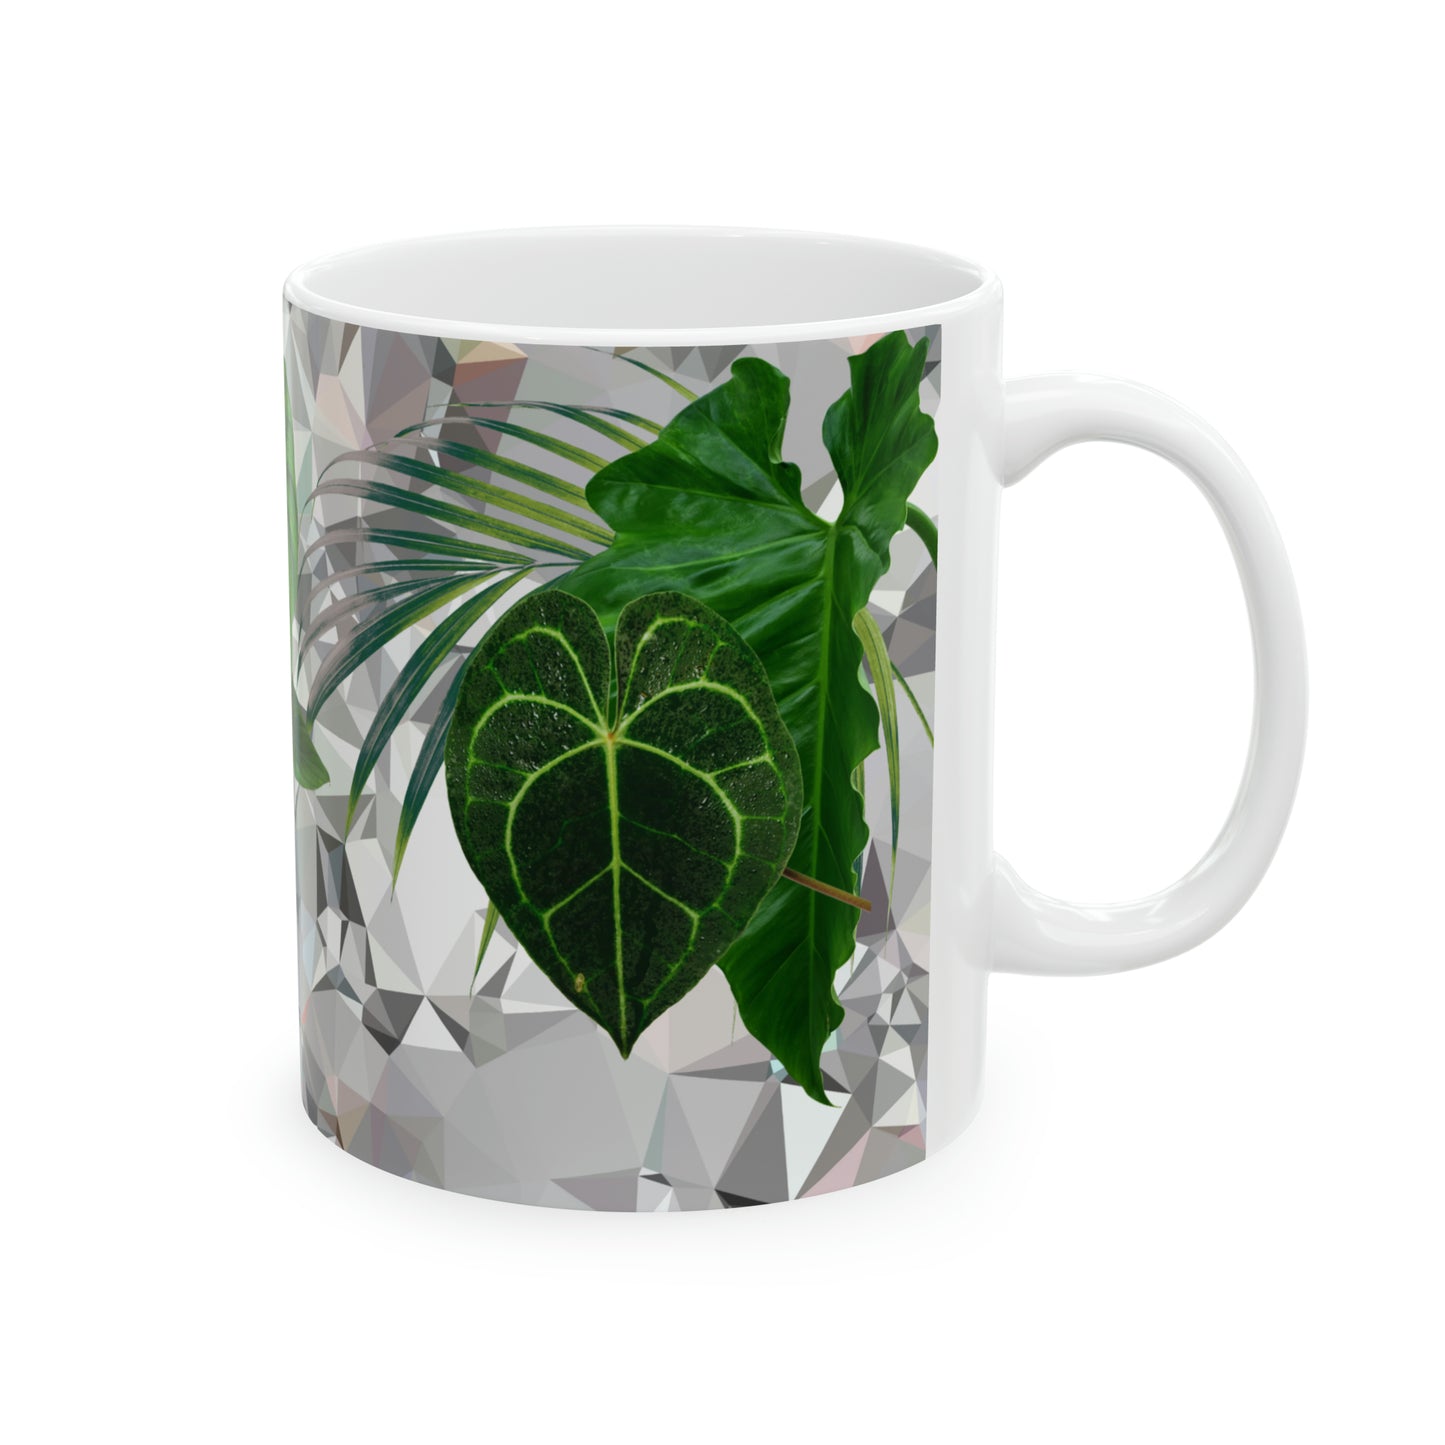 White Philodendron Ceramic Mug, 11oz Coffee Mug With Philodendron Pictures